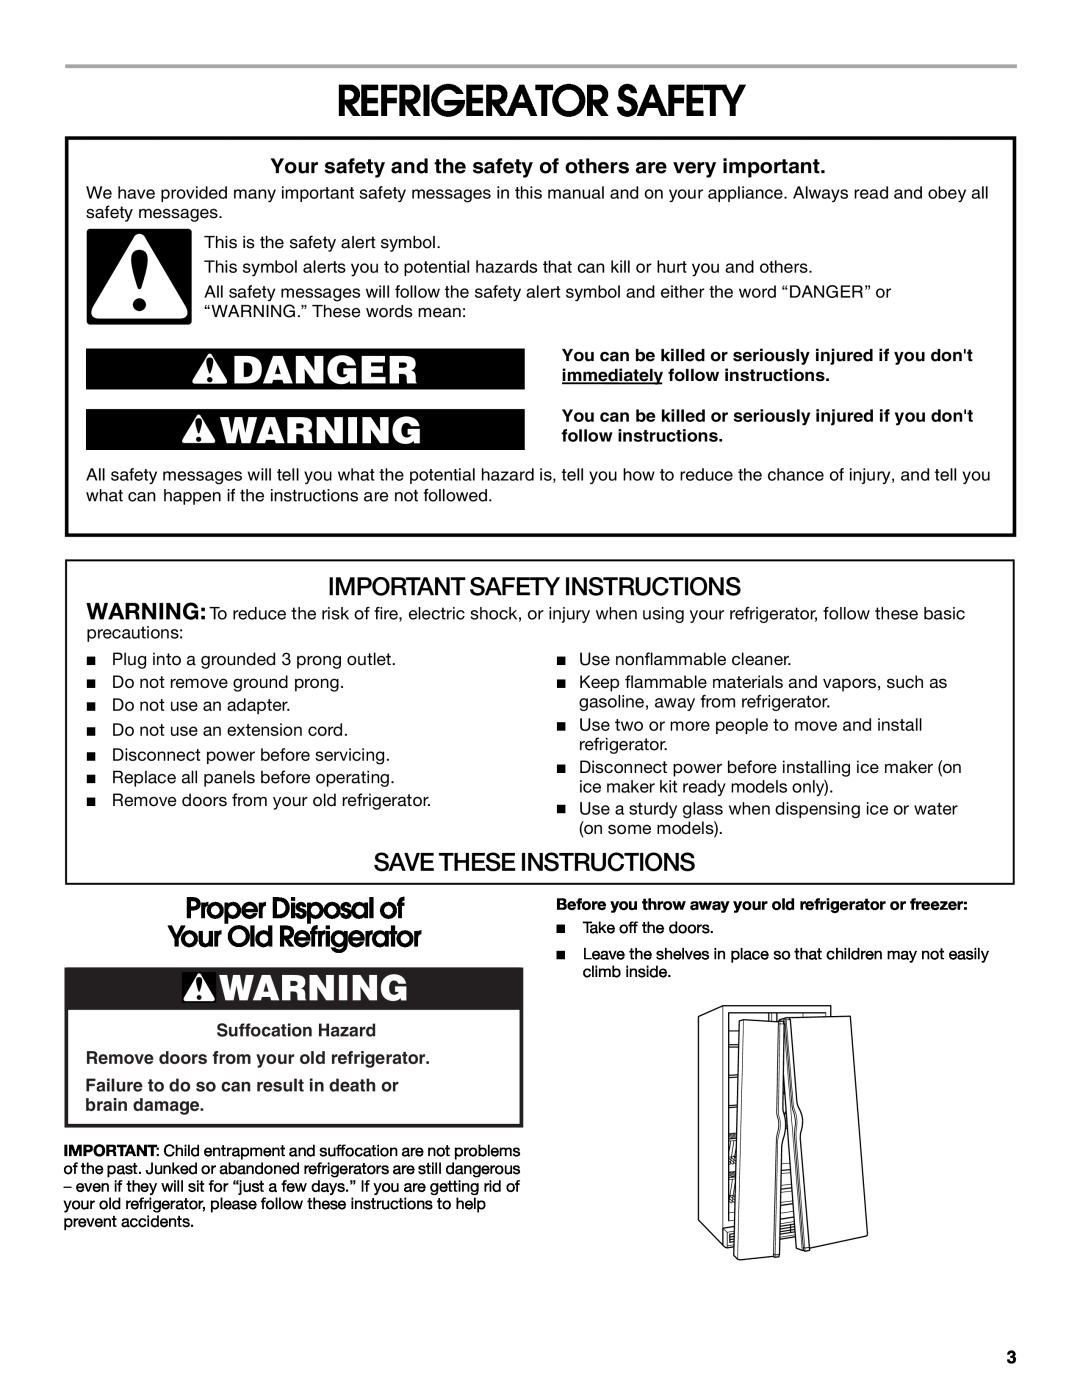 Whirlpool RS22AQXKQ02 manual Refrigerator Safety, Proper Disposal of Your Old Refrigerator, Important Safety Instructions 